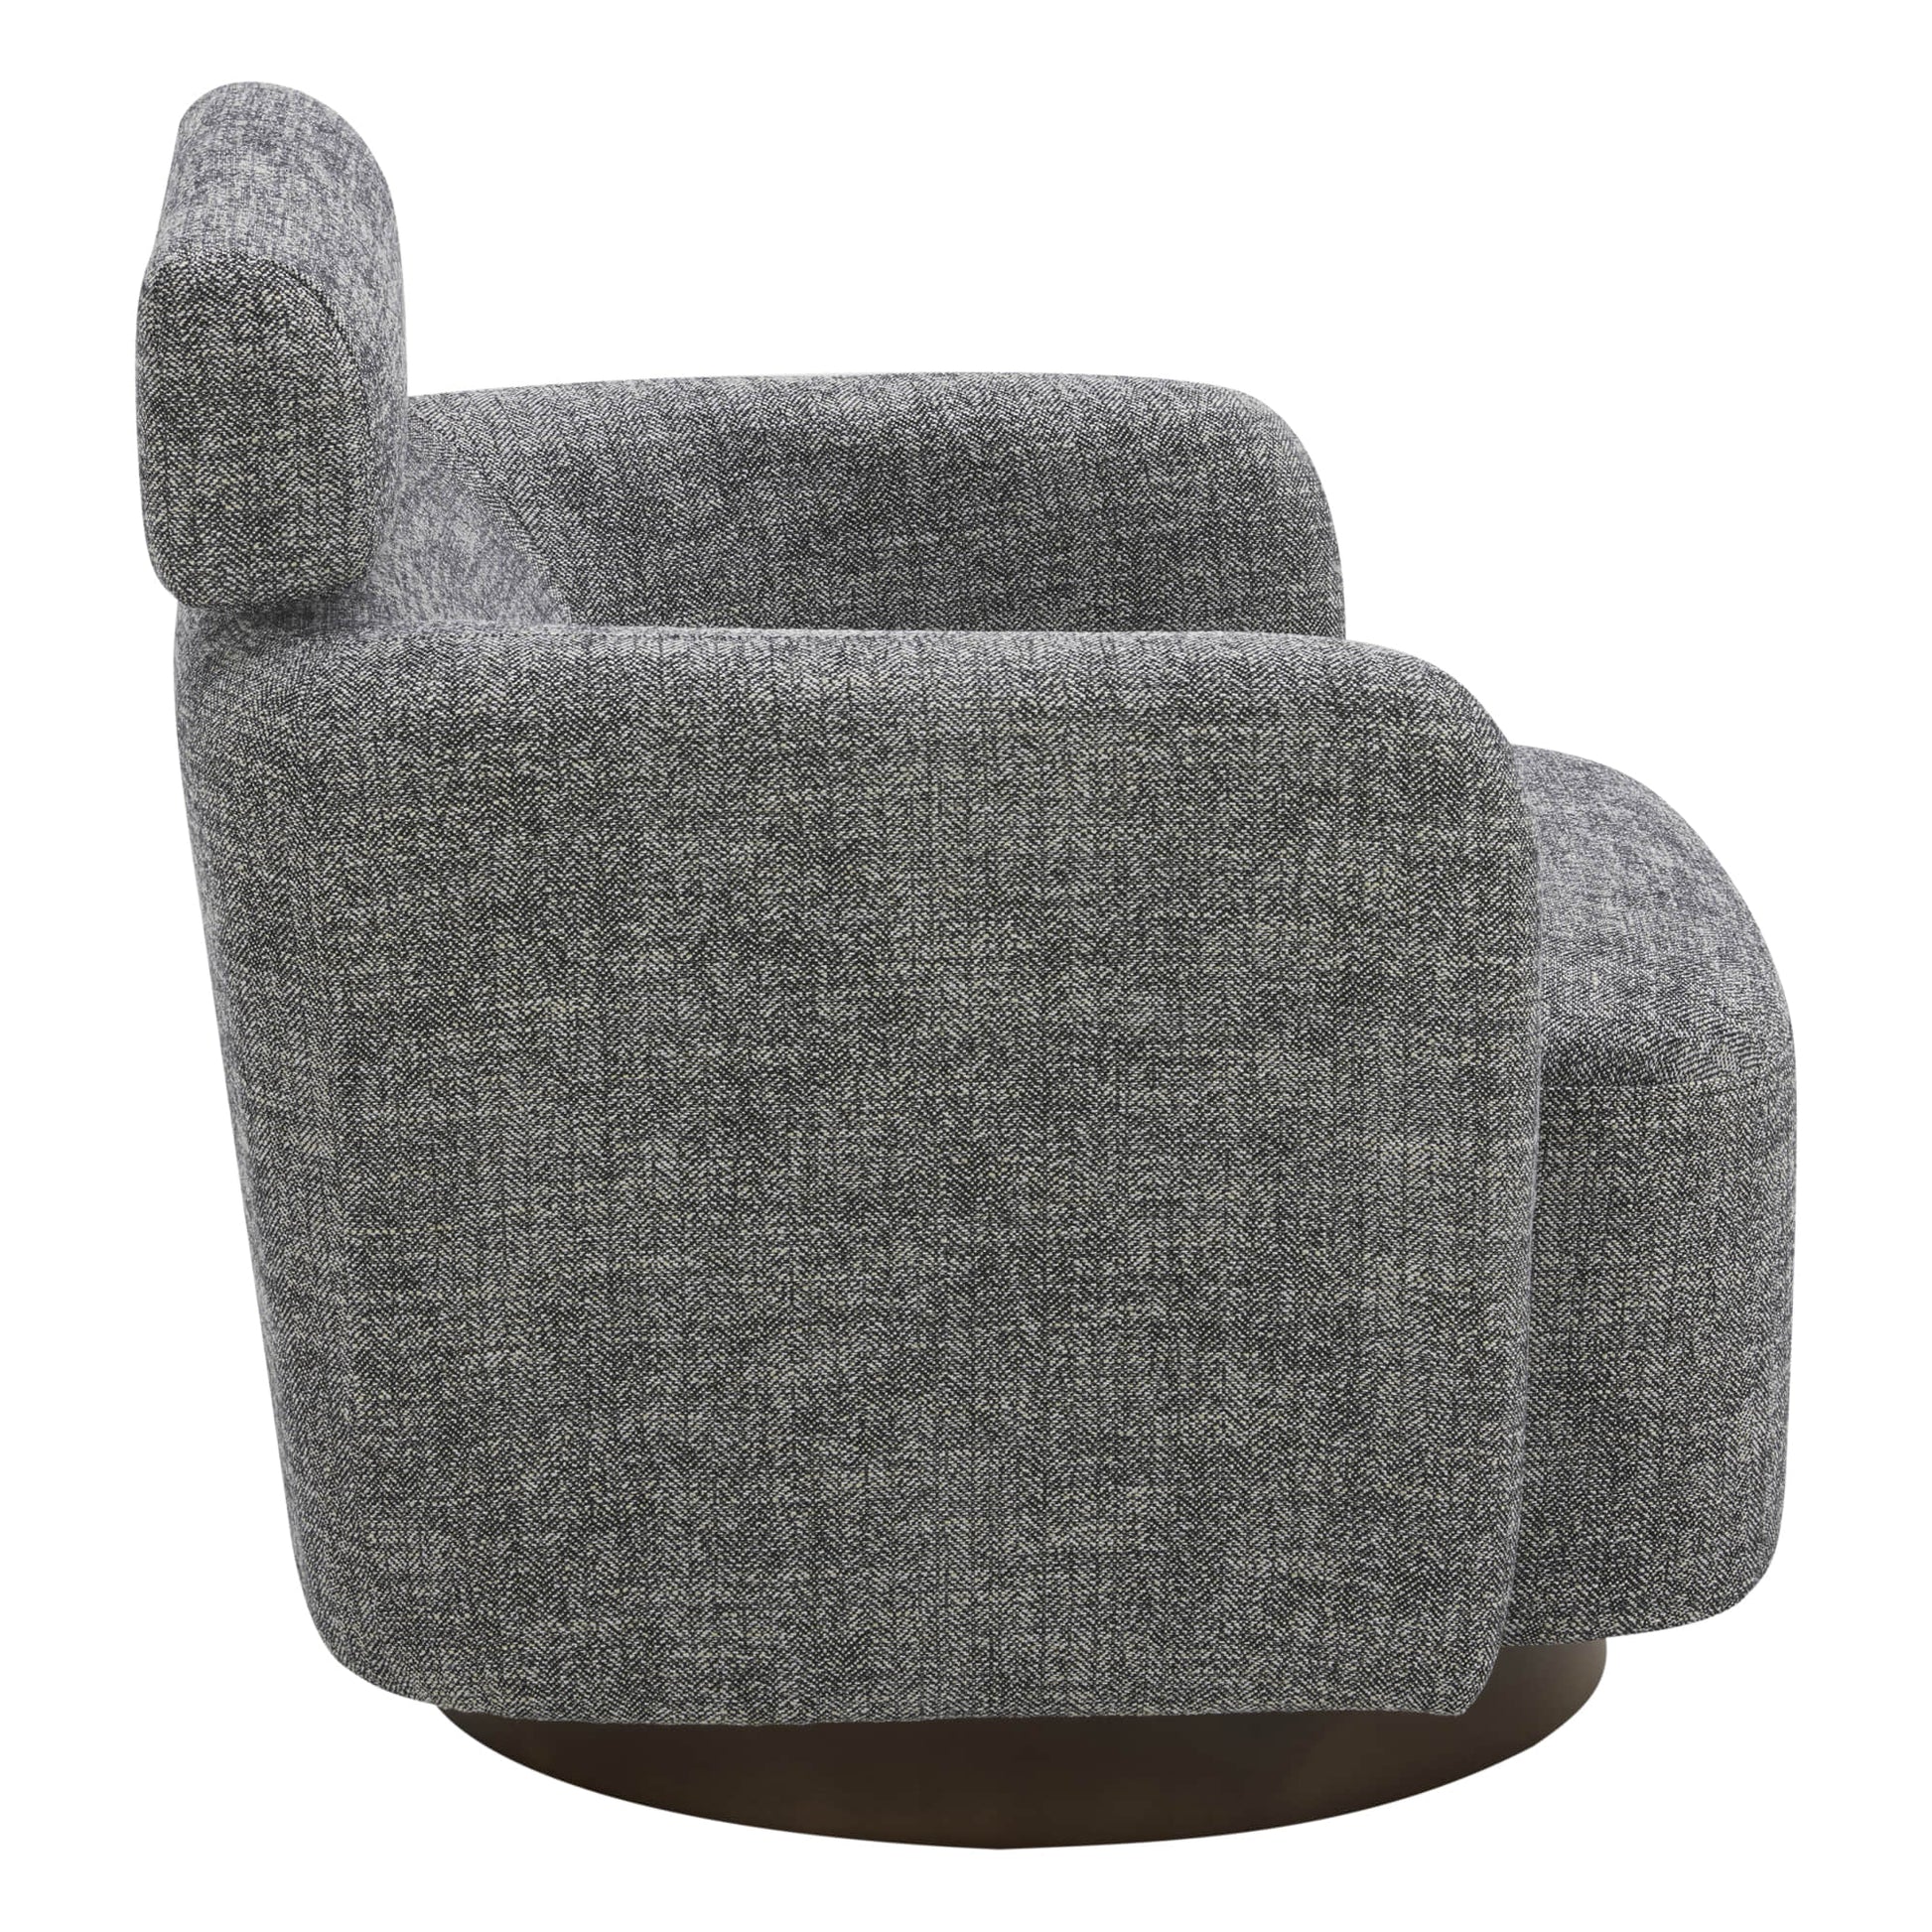 CHITA LIVING-Luna Swivel Accent Chair With Adjustable Backrest-Accent Chair-Fabric-Charcoal-